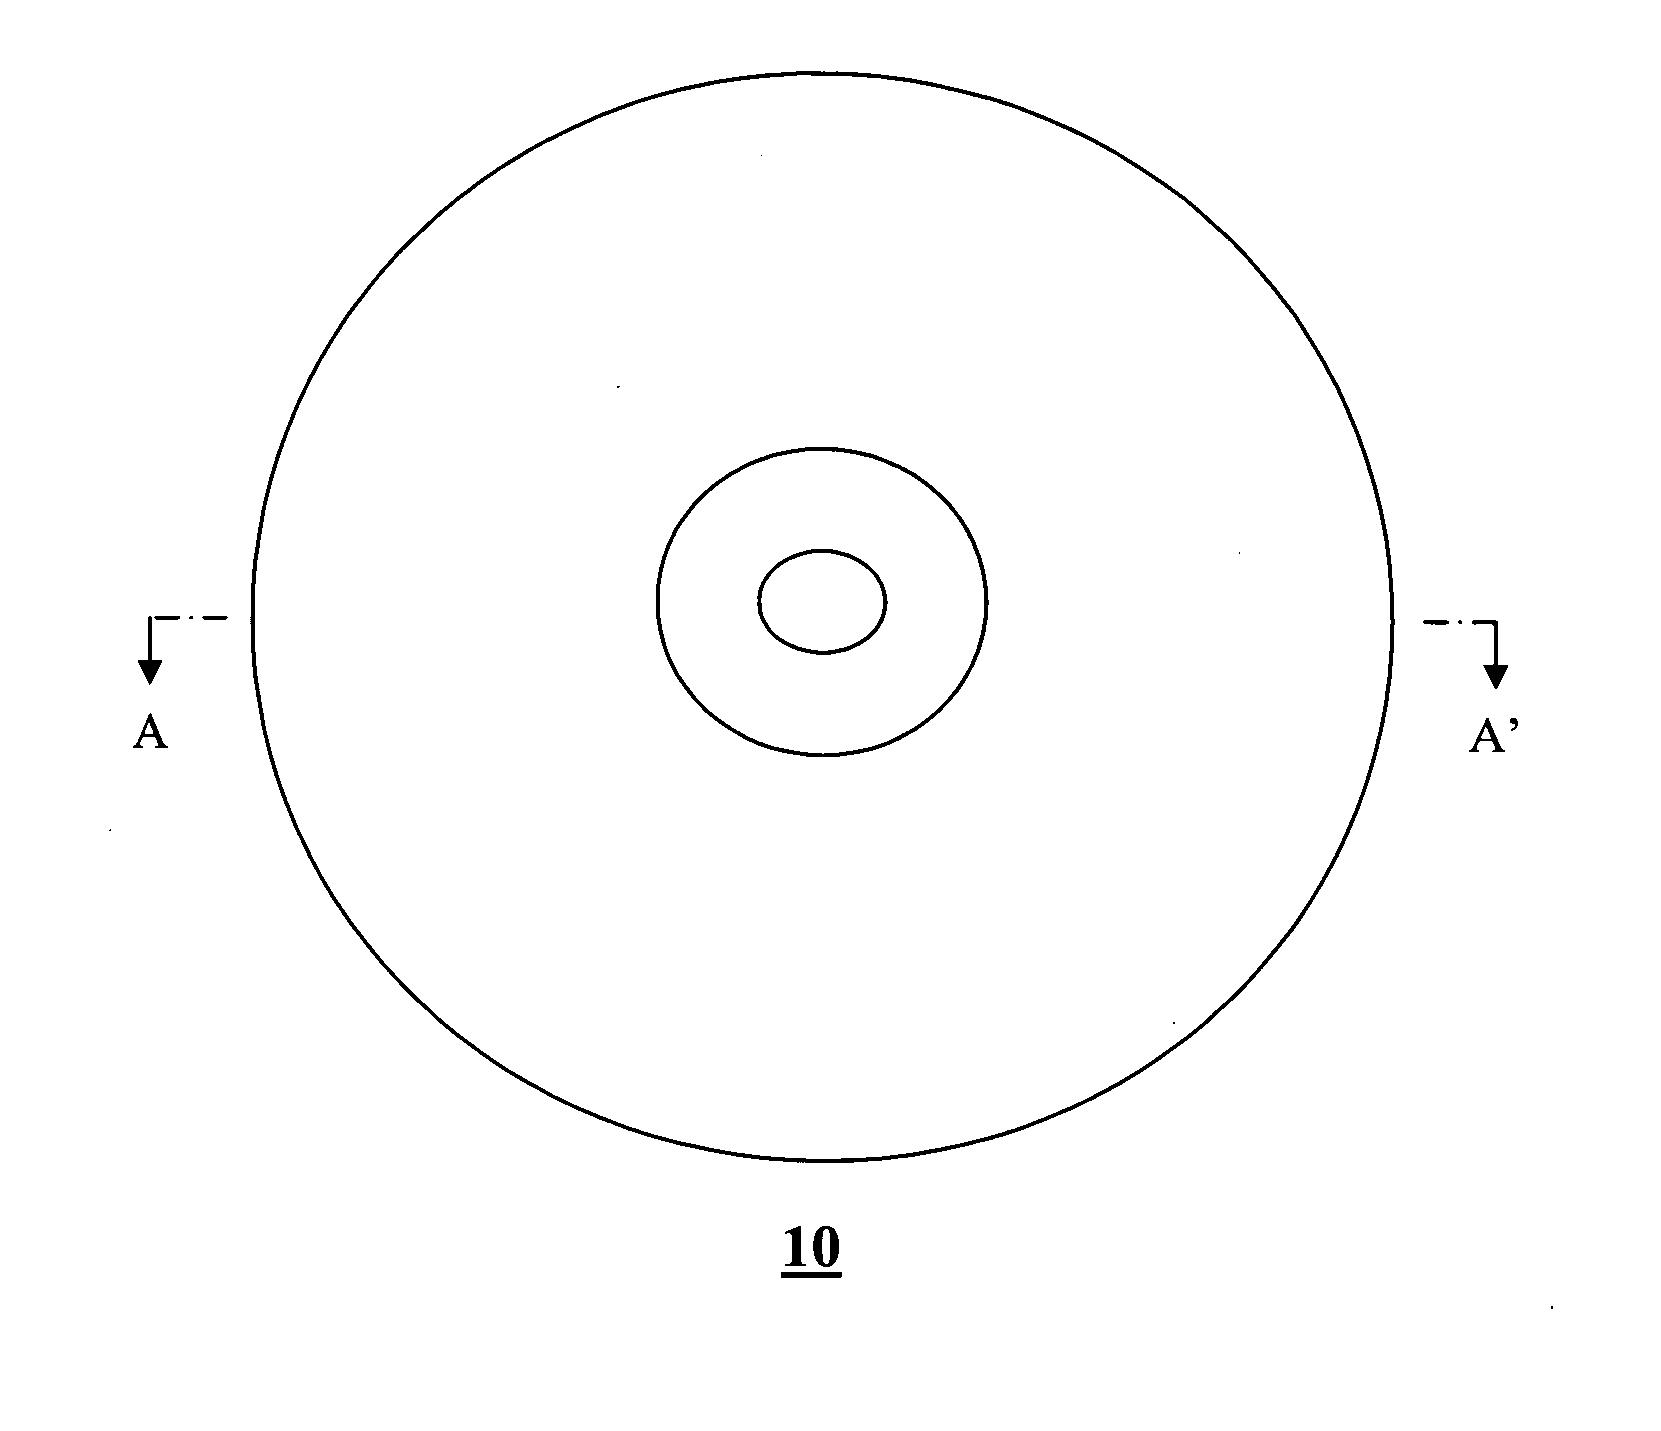 Bonded pre-recorded and pre-grooved optical disc